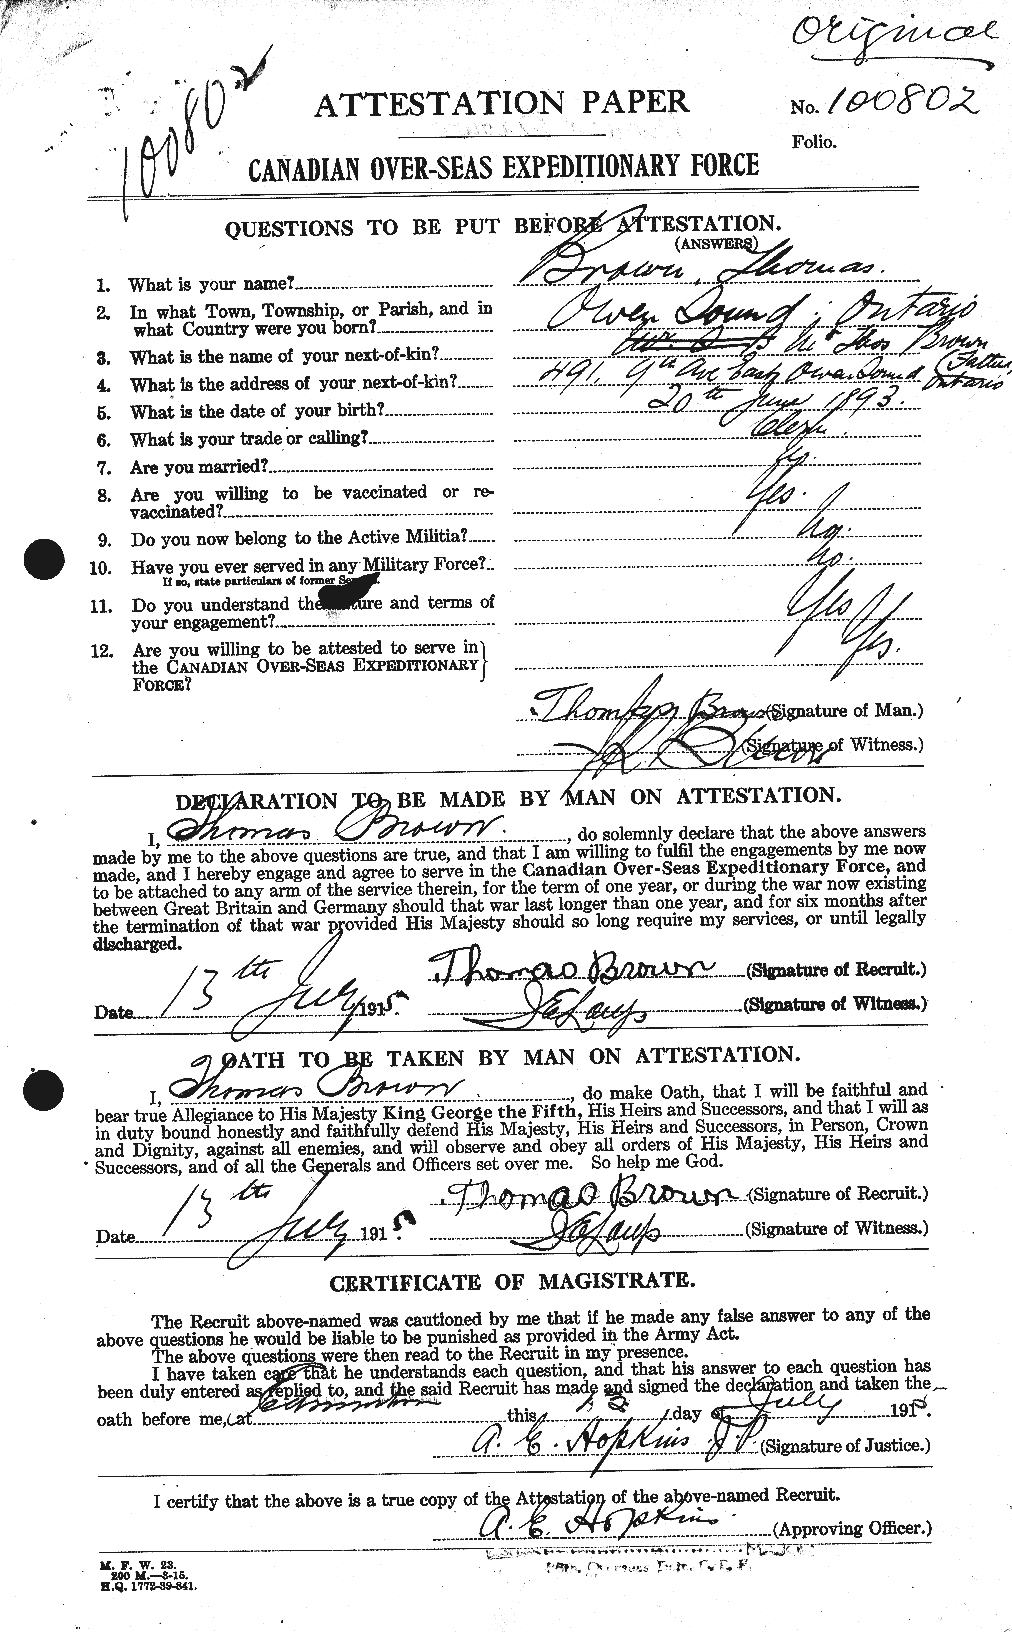 Personnel Records of the First World War - CEF 266520a